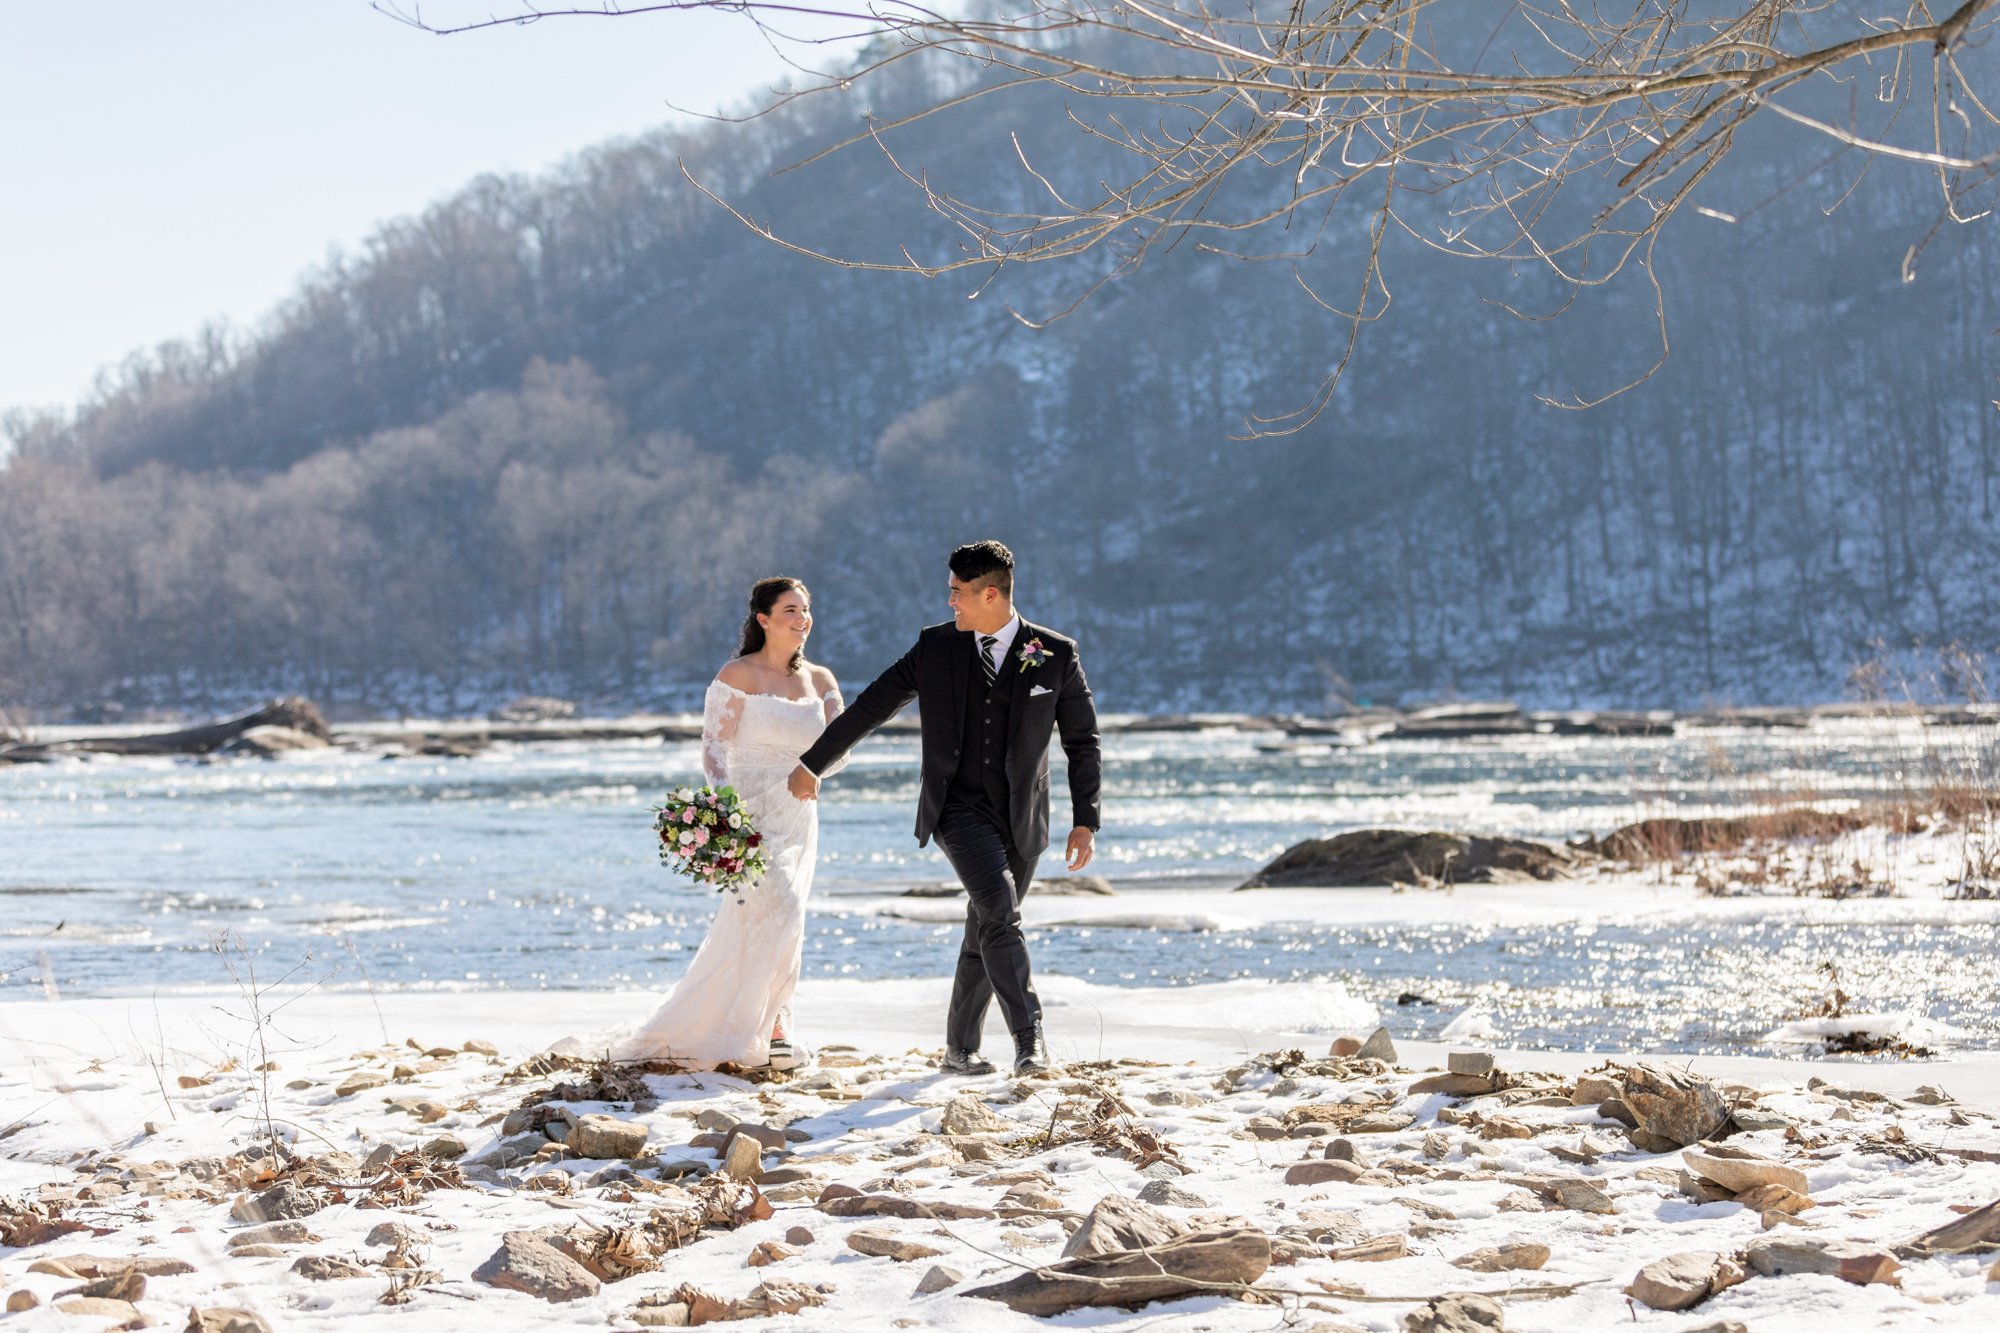 Couple on their wedding day on the potomac river in harpers ferry, west virginia